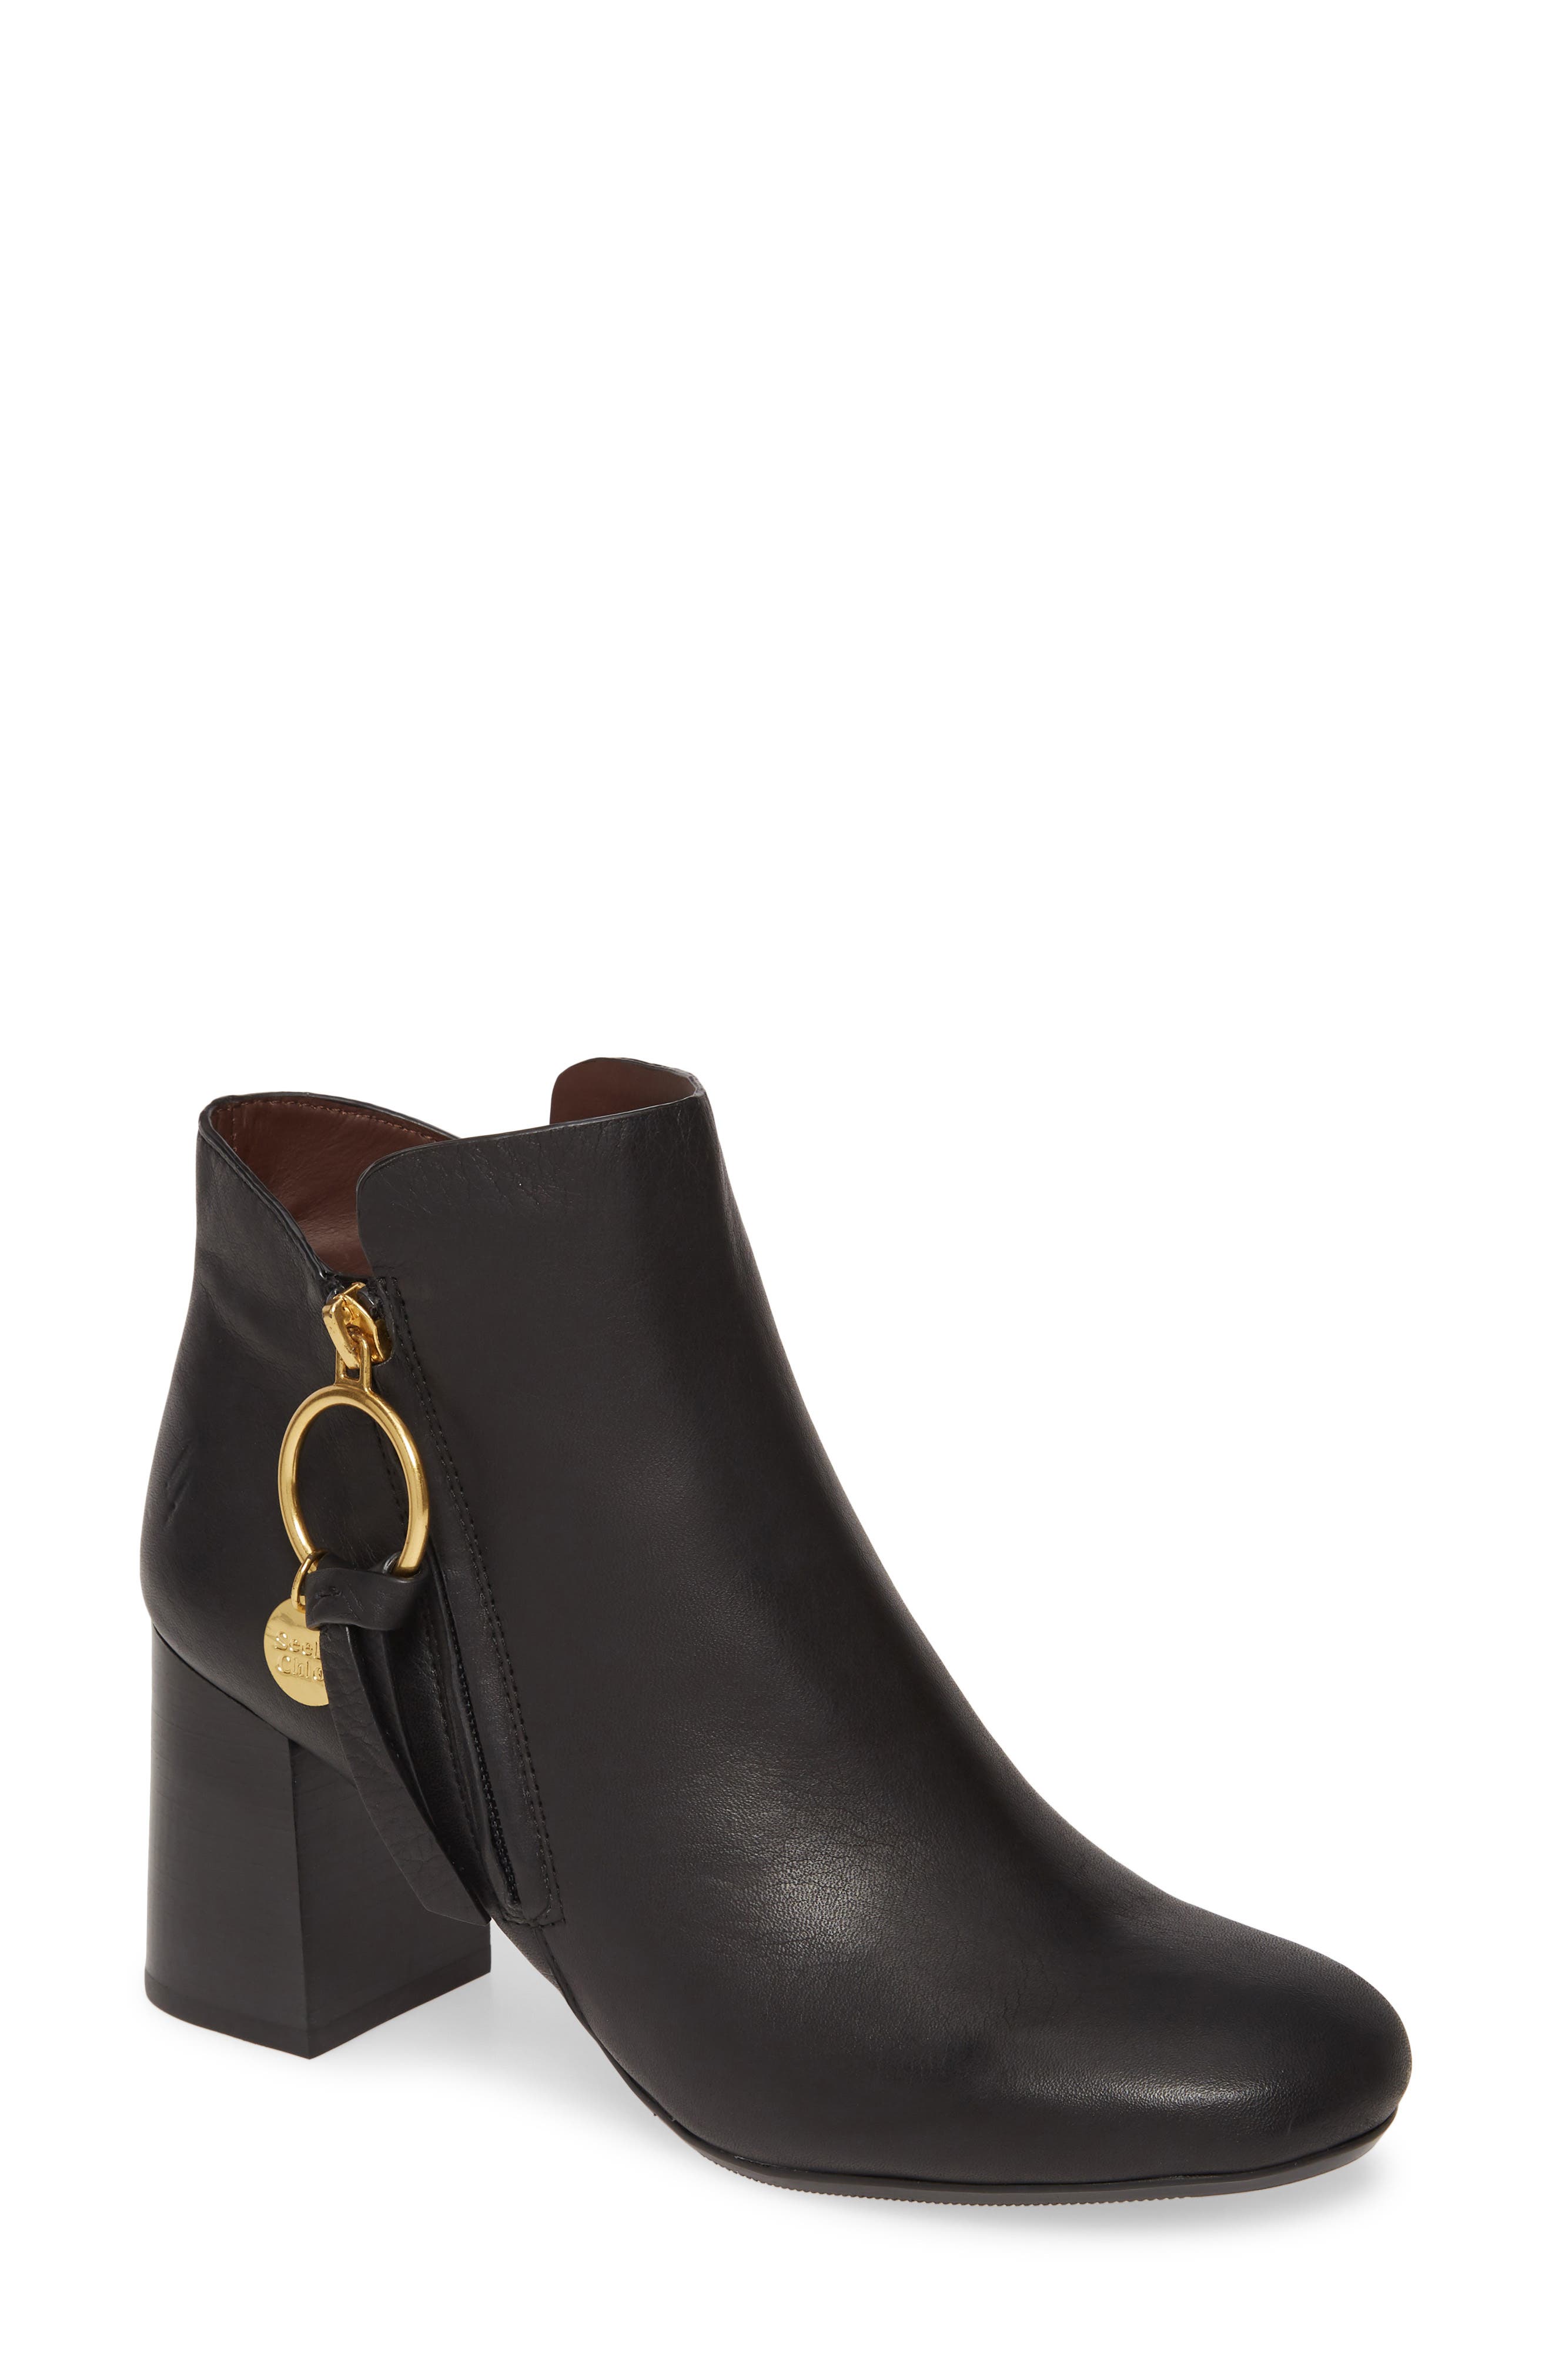 see by chloe louise bootie